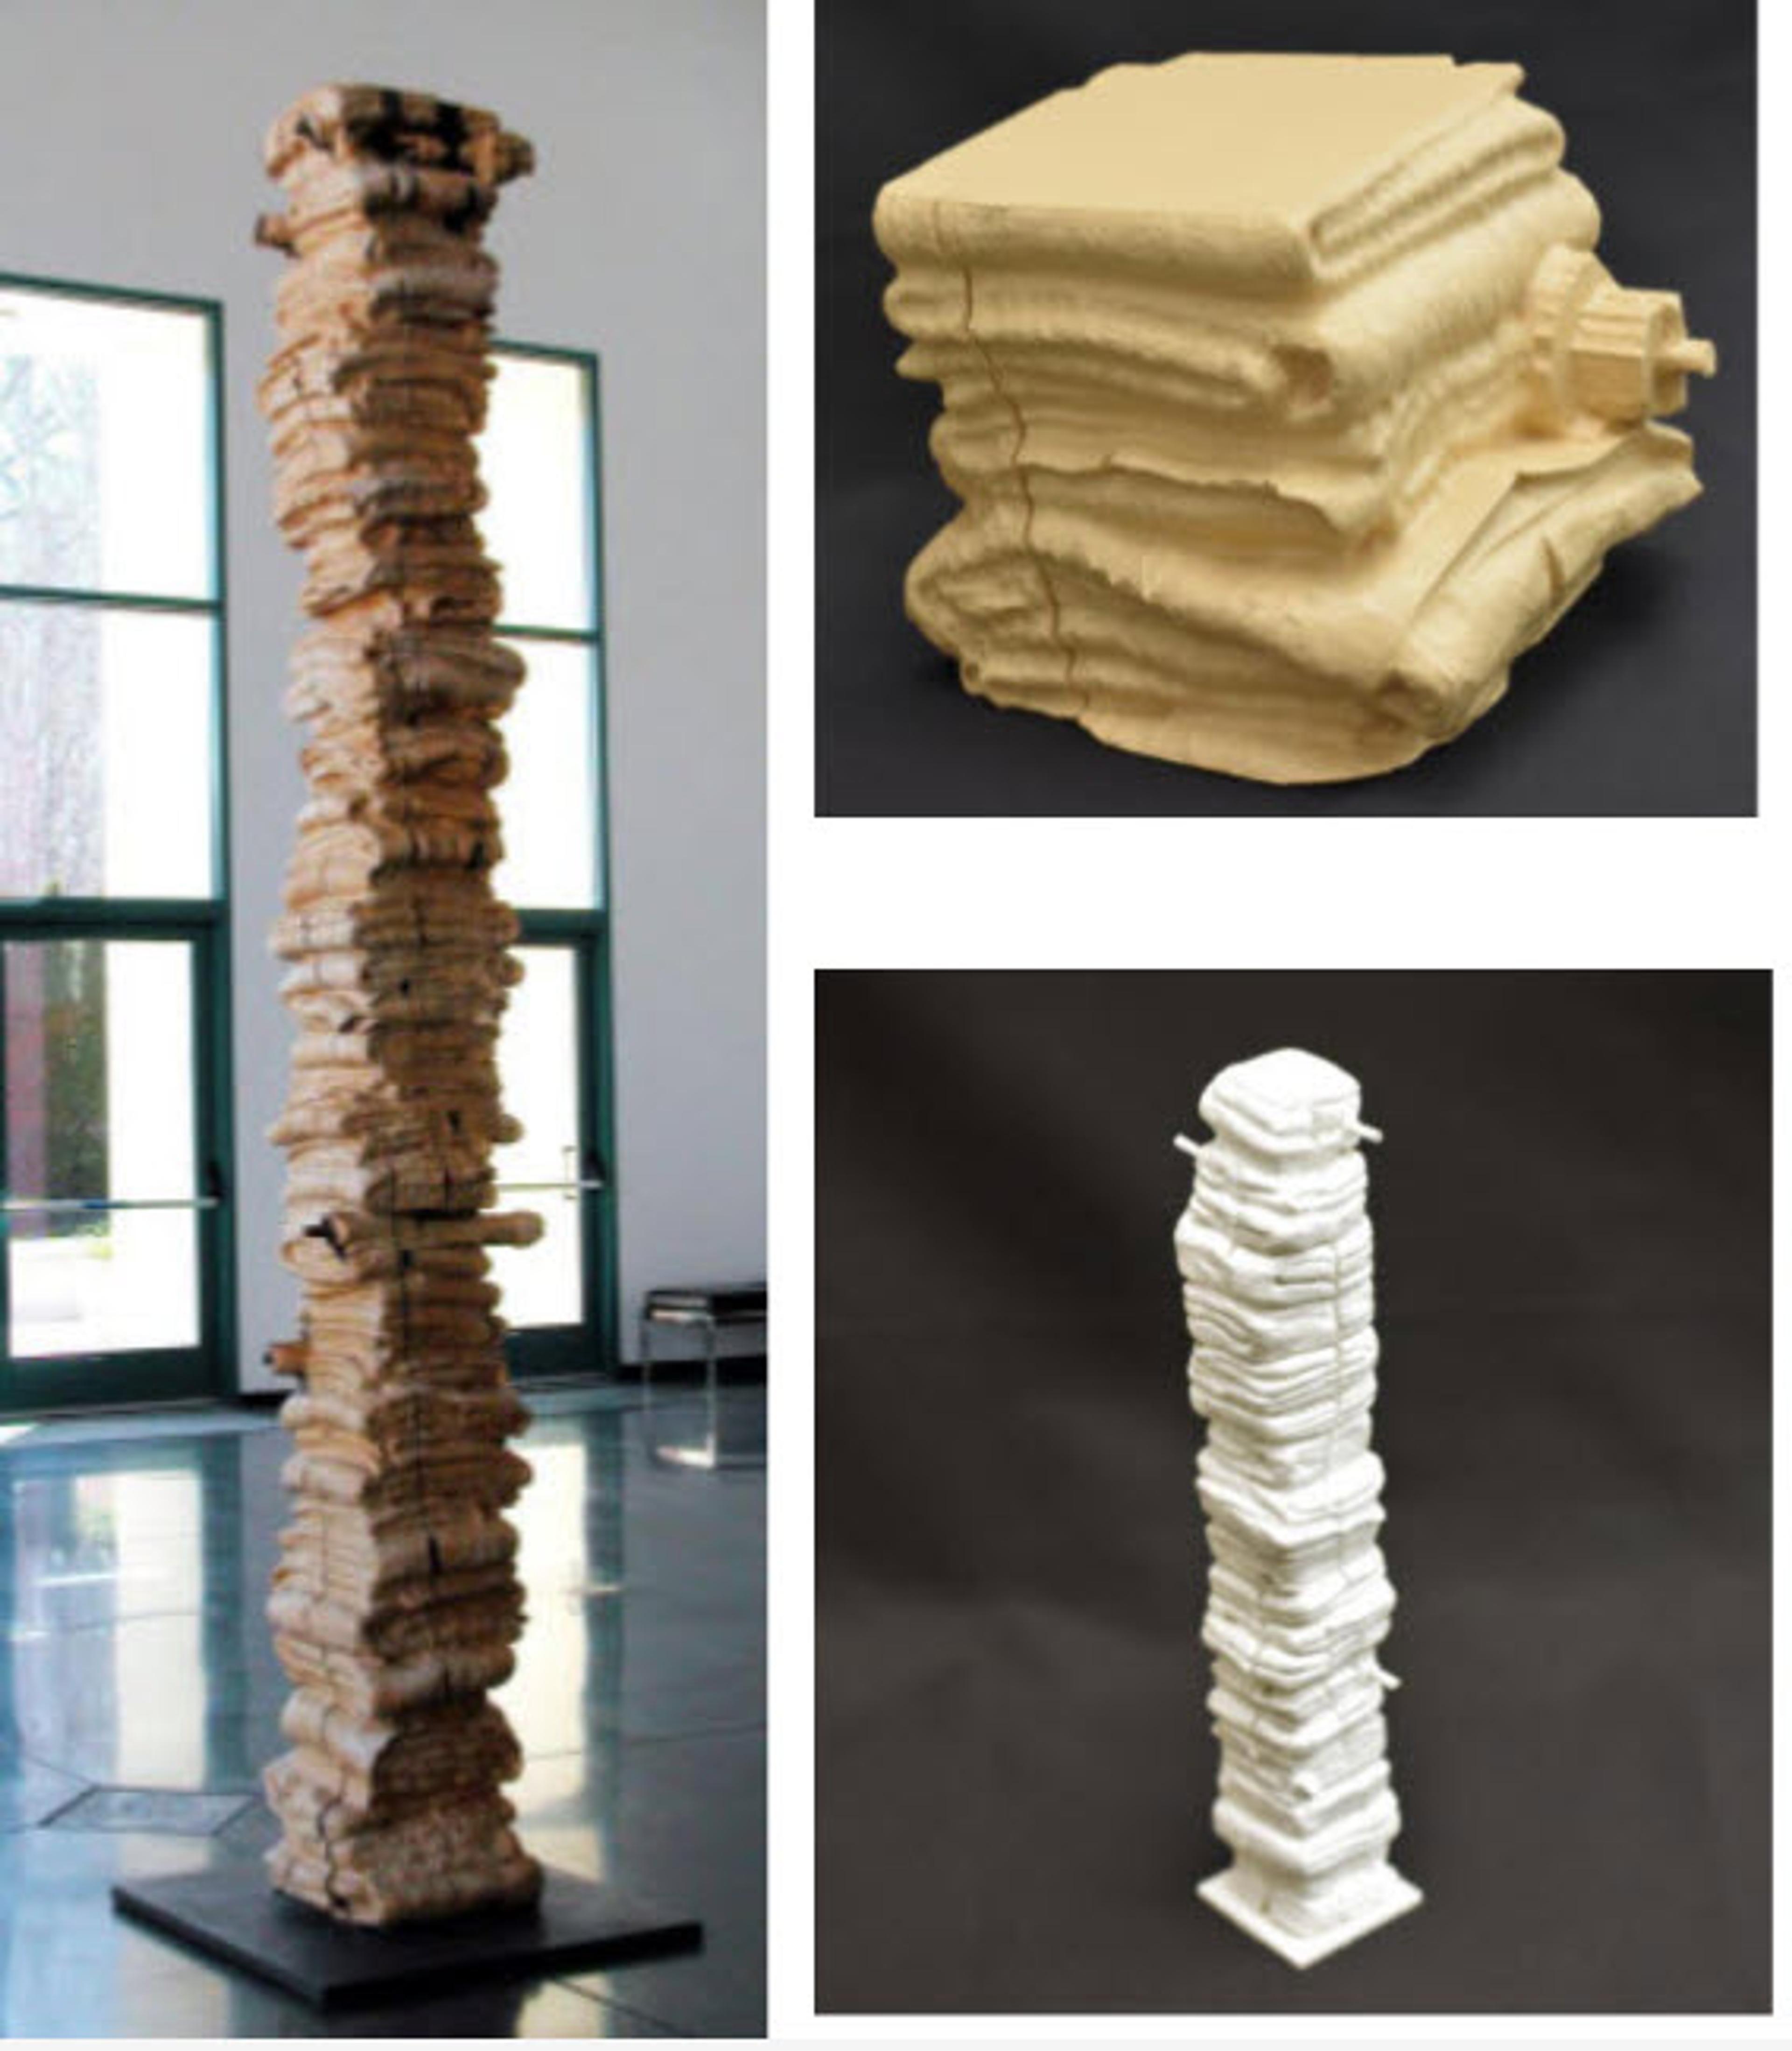 Left: Marie Watt, Canopy (Odd One), 2005, salvaged industrial yellow cedar and steel rebar, 120″ x 13″ x 13″, Boise Art museum permanent collection Top right: Scale model created by BAM staff. Bottom right: 3D printed cross-section created by intermountain 3D